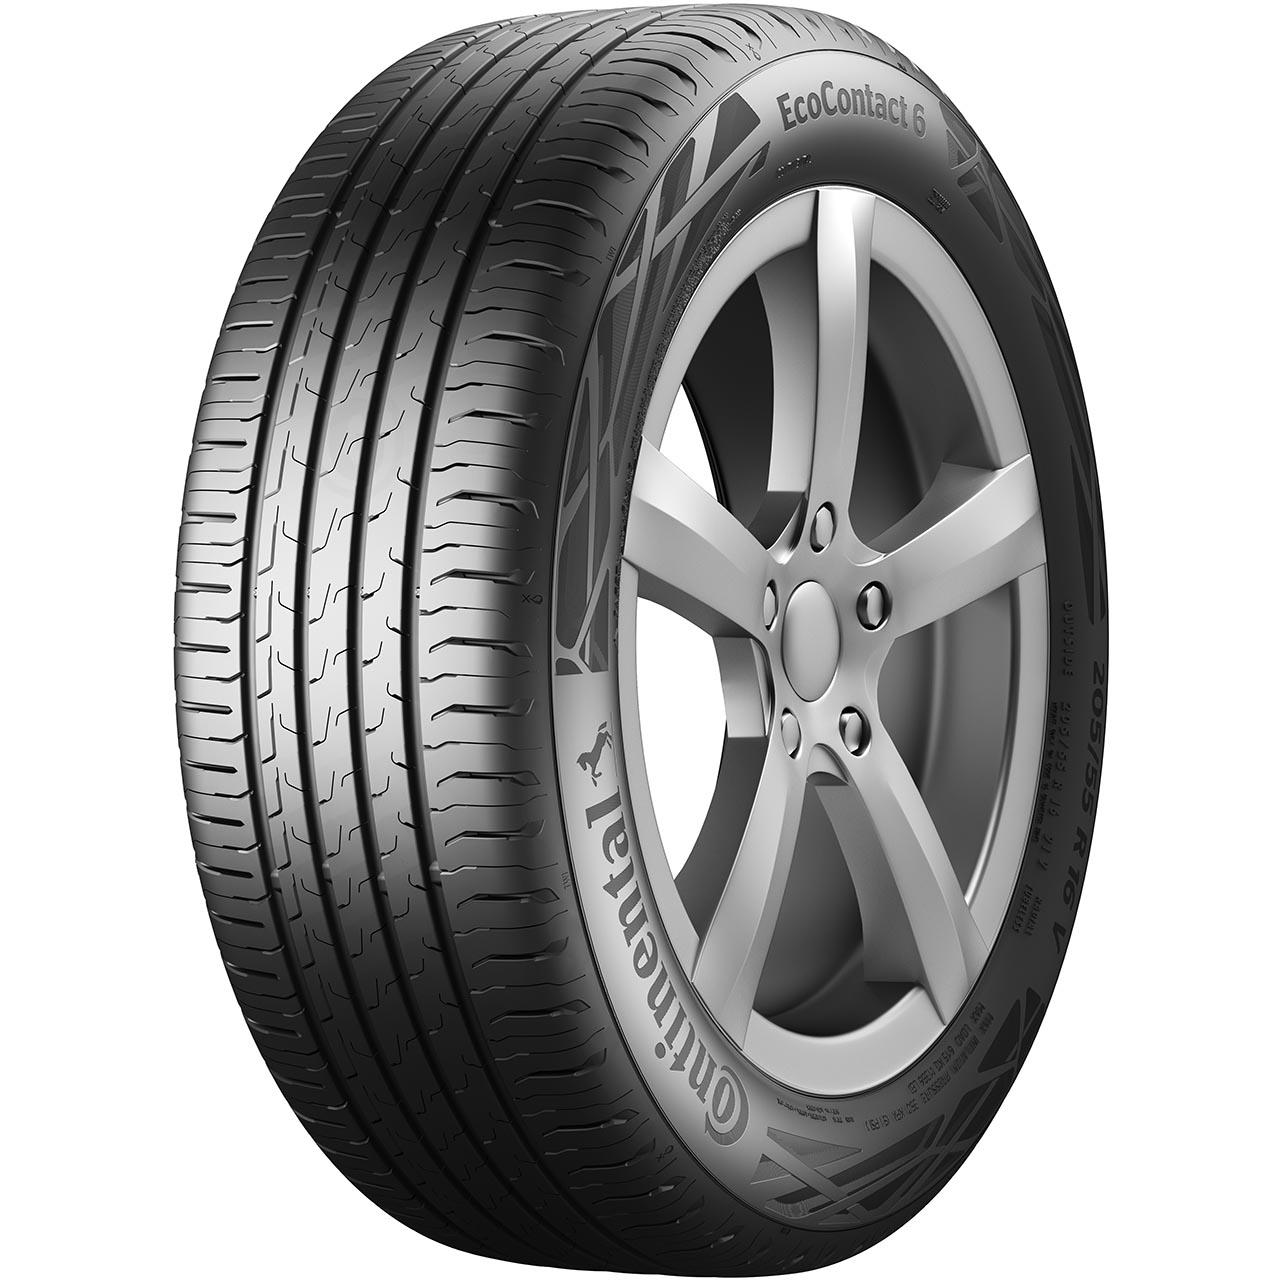 Continental ECOCONTACT 6 255/45R20 105W XL MGT